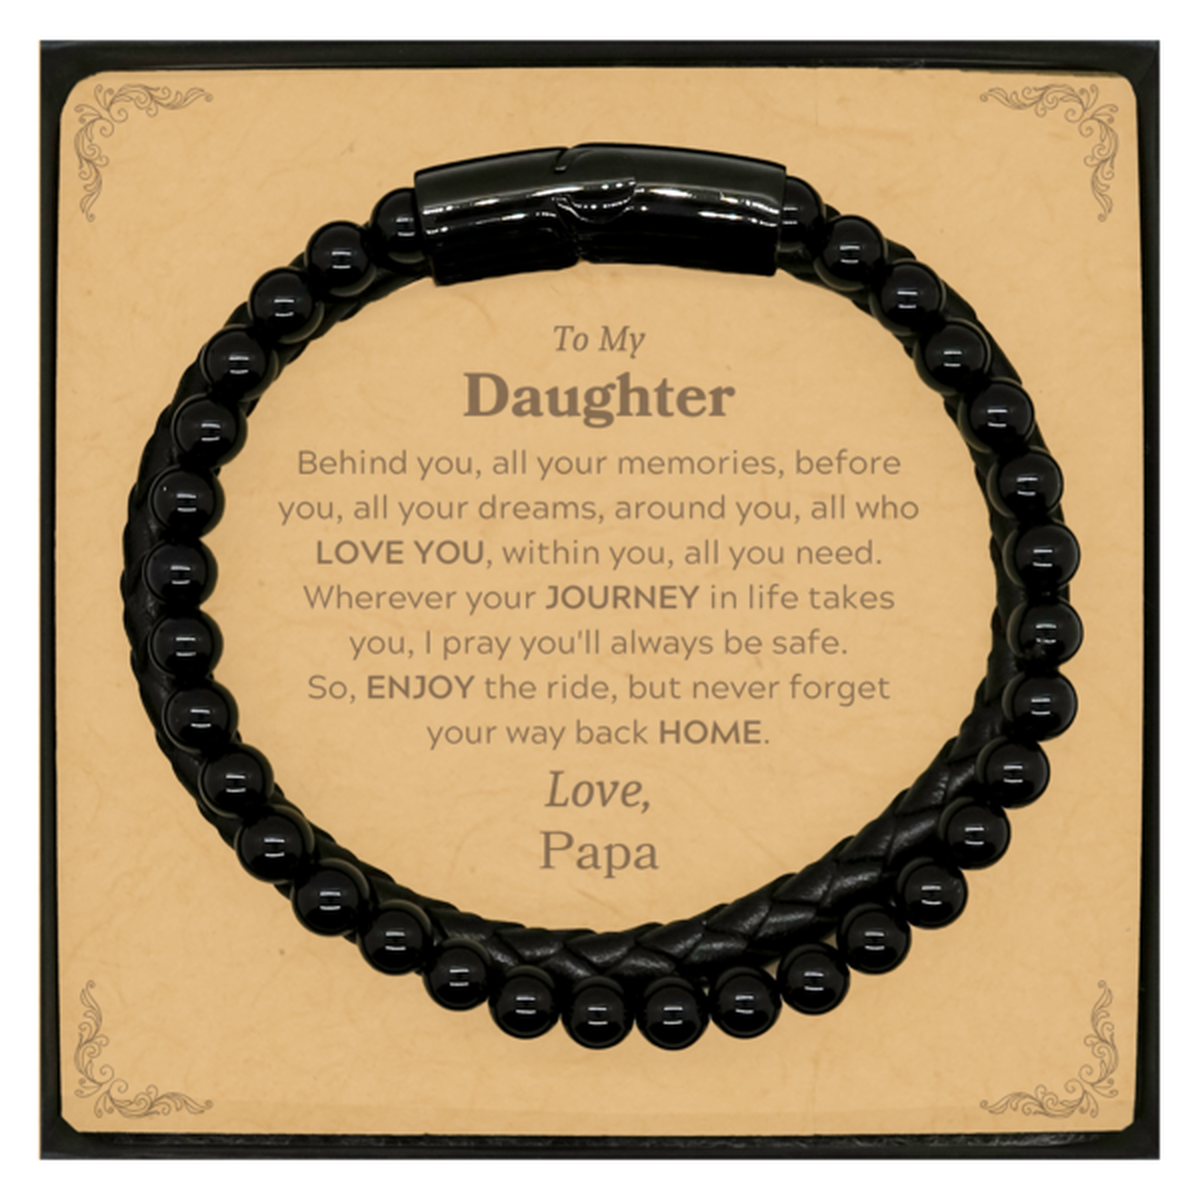 To My Daughter Graduation Gifts from Papa, Daughter Stone Leather Bracelets Christmas Birthday Gifts for Daughter Behind you, all your memories, before you, all your dreams. Love, Papa